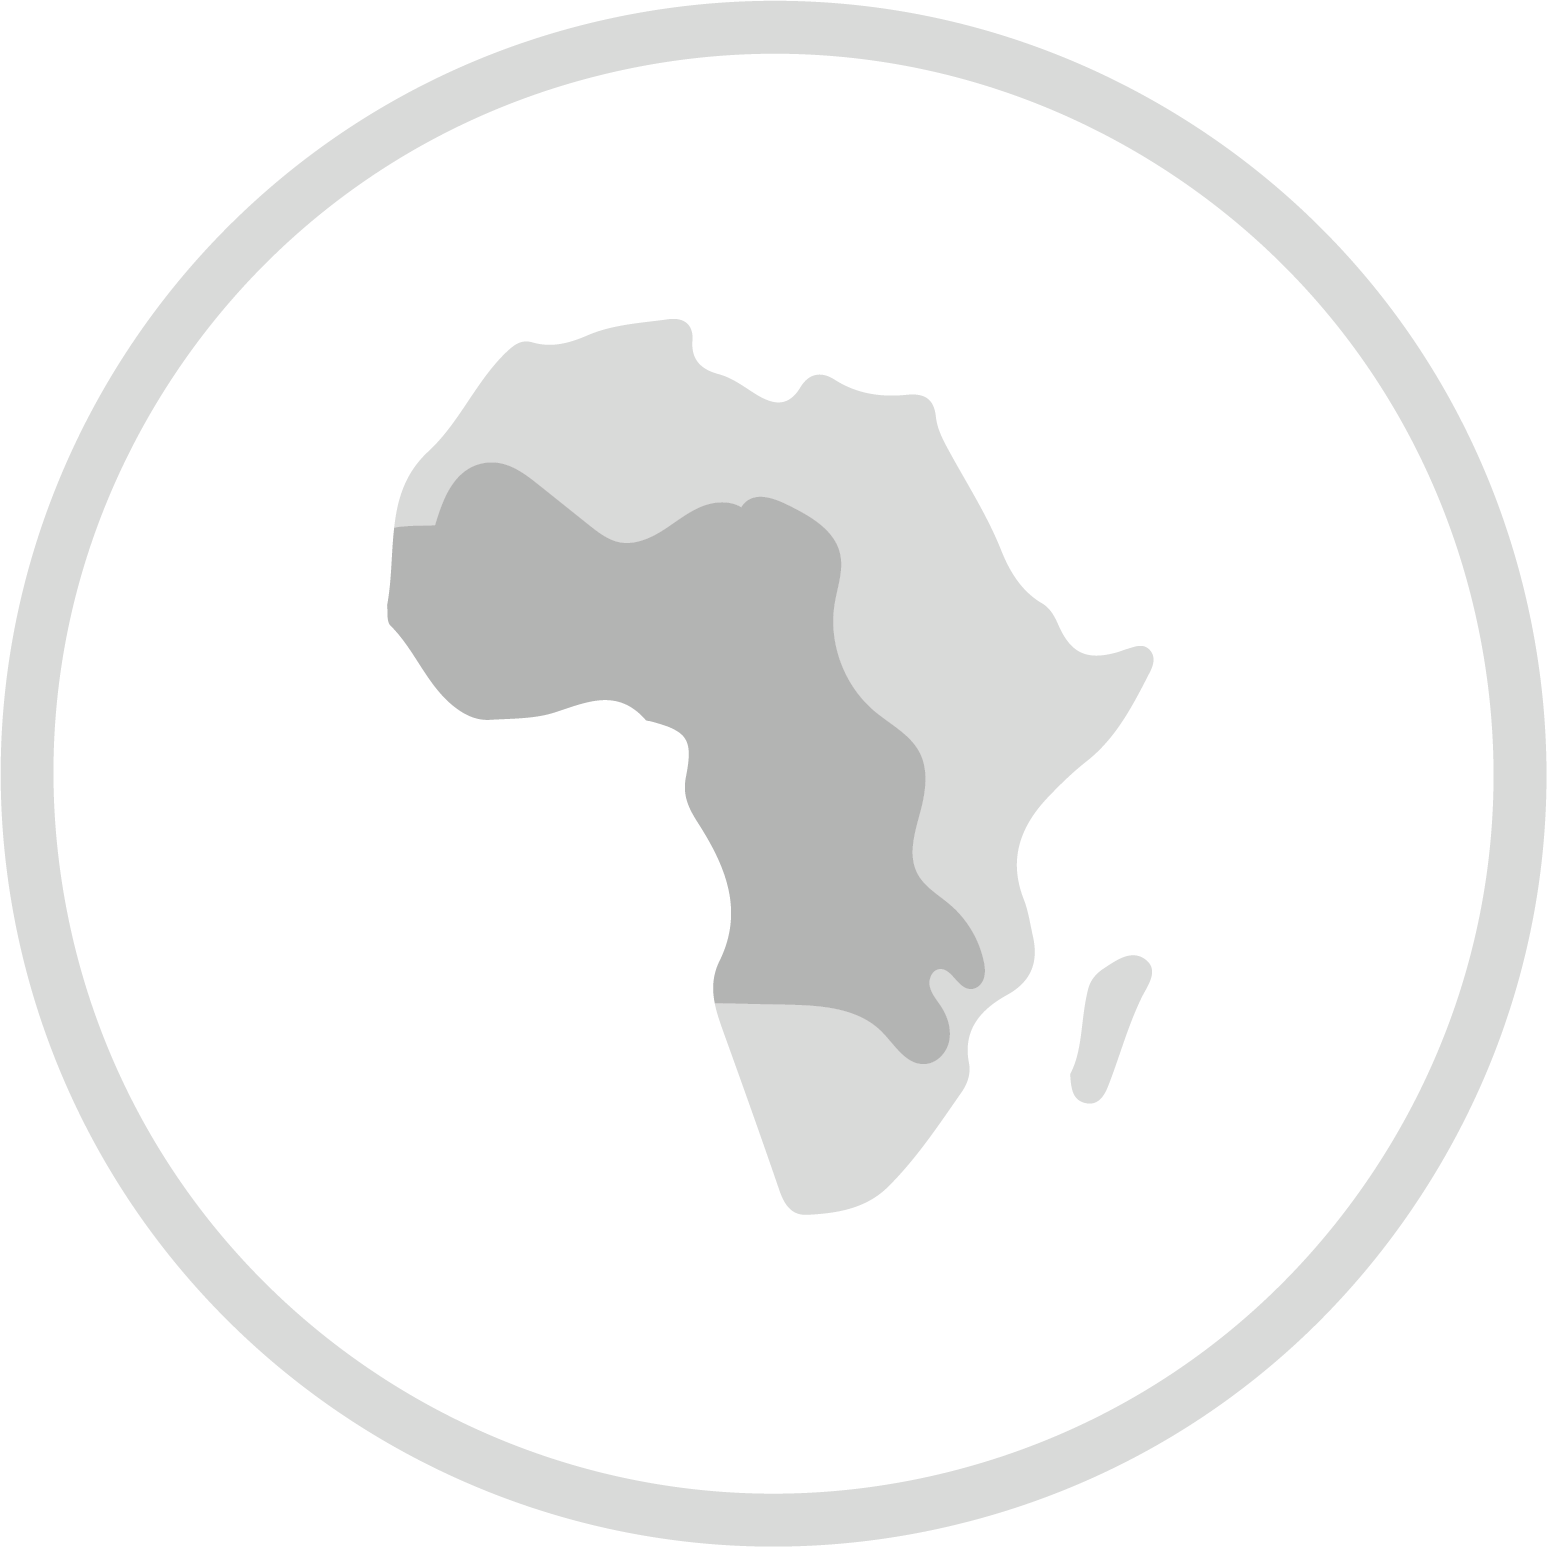 Western and Central Africa